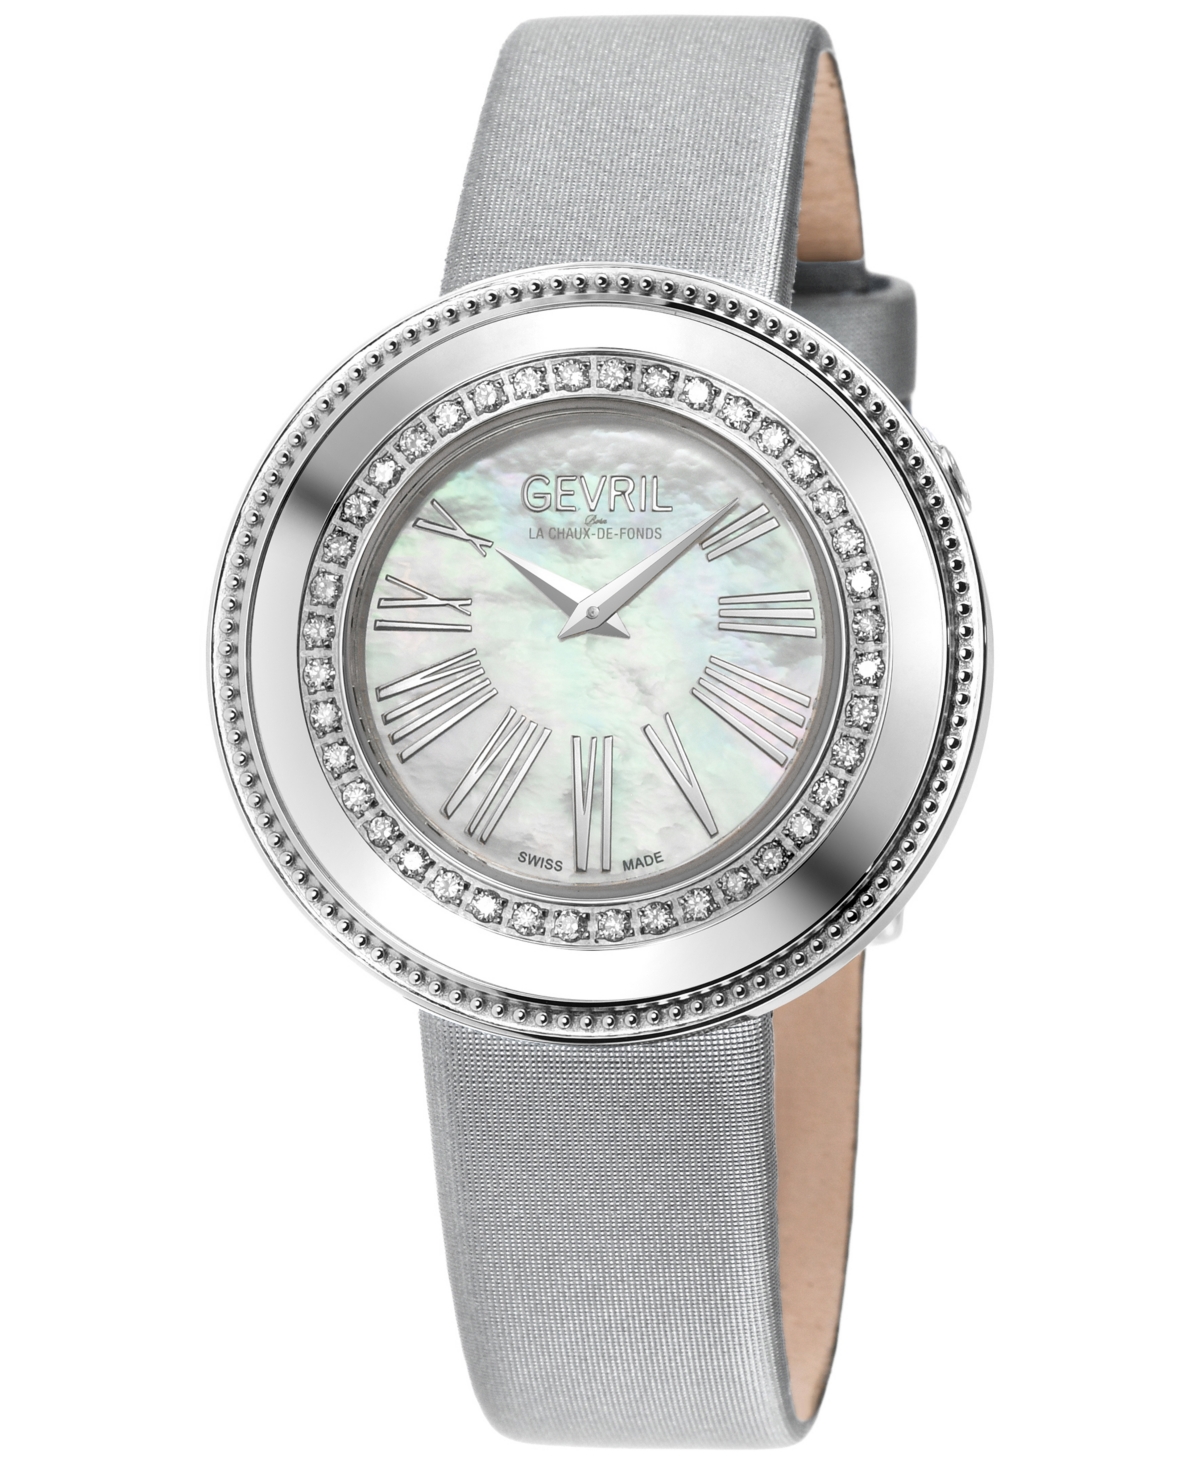 Gevril Women's Gandria Silver-tone Leather Watch 36mm